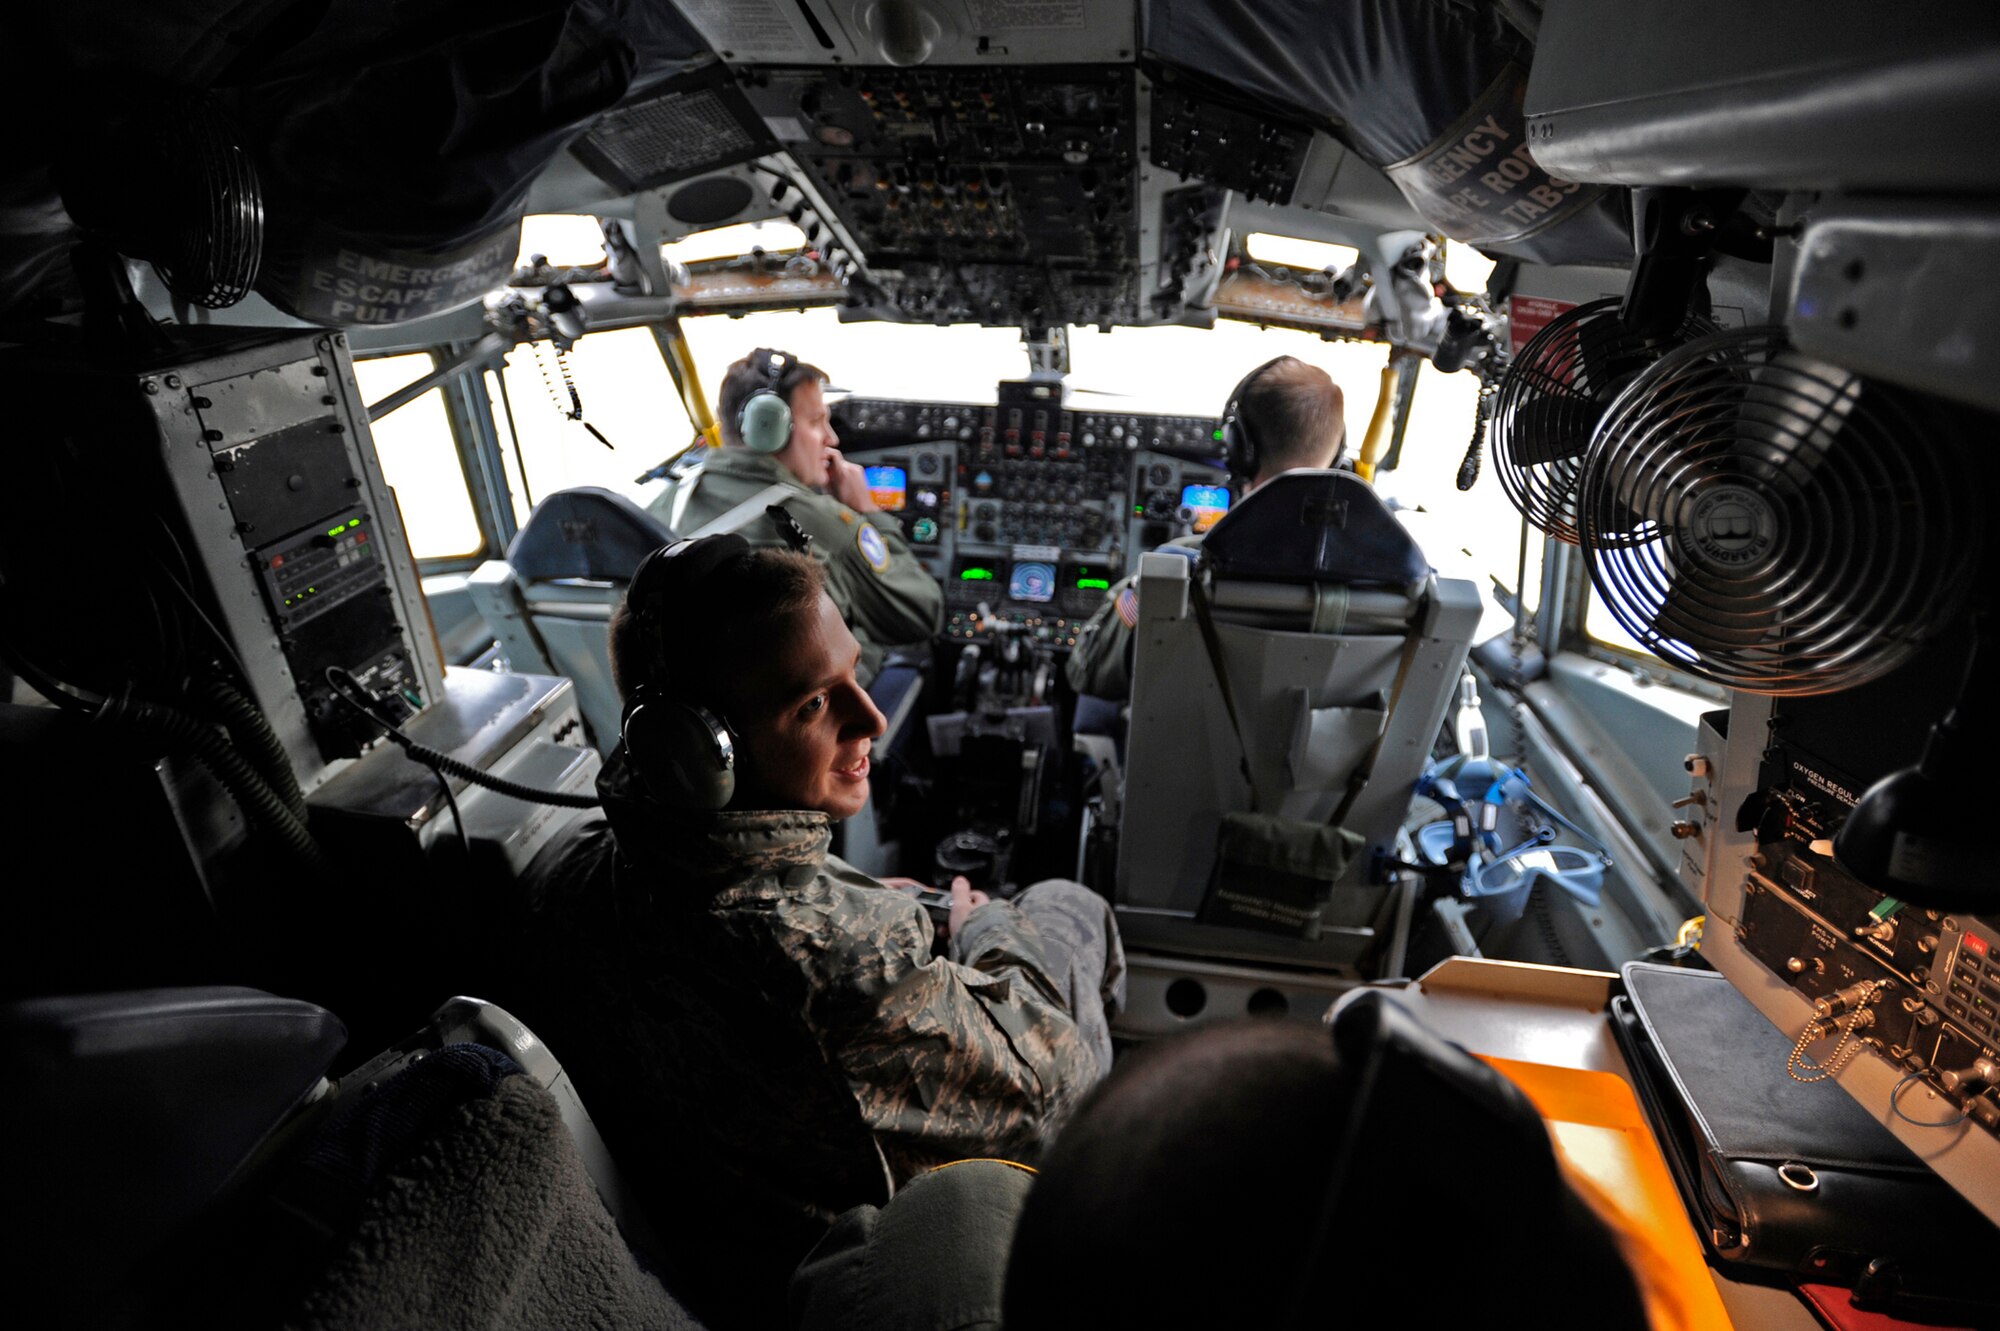 Airman 1st Class Matt Rourk takes a look around the cockpit of a KC-135 he flew in during the 931st Air Refueling Group's January drill weekend. Airman Rourk was part of a large group of active-duty Airmen who flew with a 931st crew to learn about aerial refueling, the primary mission at McConnell Air Force Base. The 931st ARG is an Air Force Reserve unit. Airman Rourk, a native of North Augusta, S.C., and his fellow active-duty passengers are assigned to the 22nd Air Refueling Wing, the 931st's host unit at McConnell. (U.S. Air Force photo/Tech. Sgt. Jason Schaap)